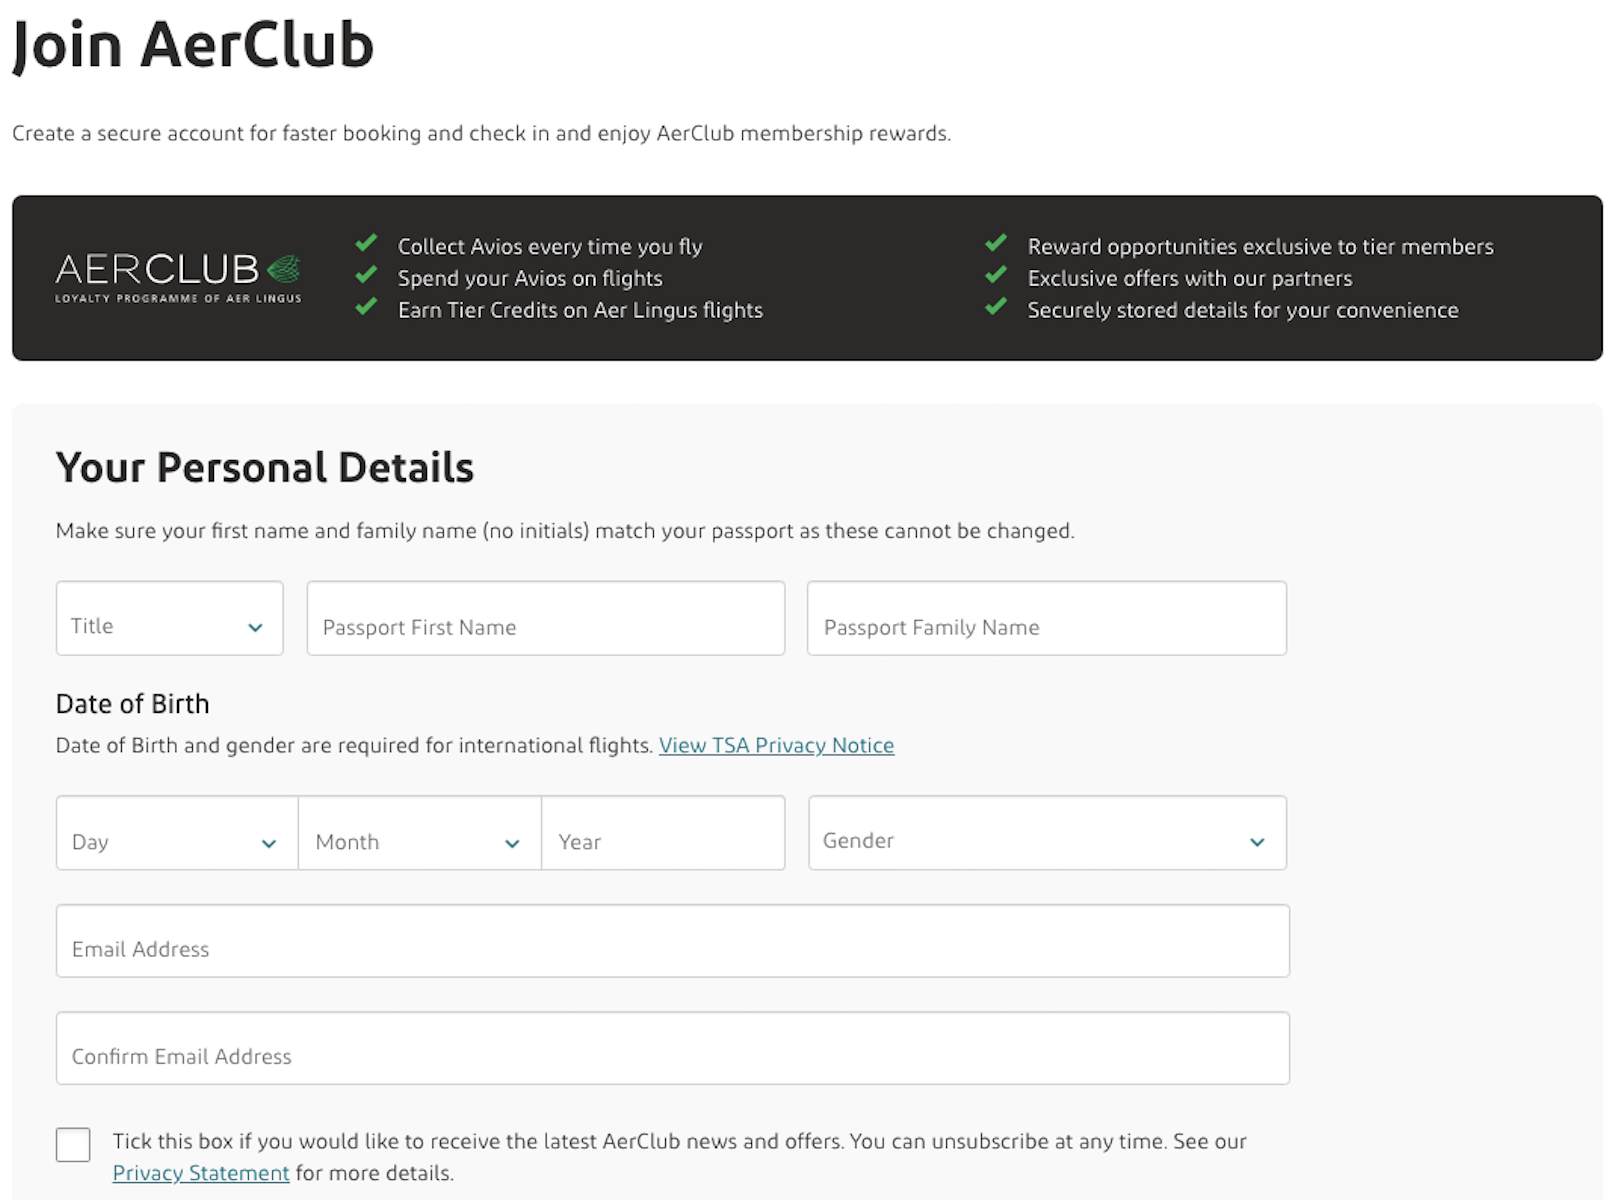 Image of Aer Lingus AerClub sign-up page